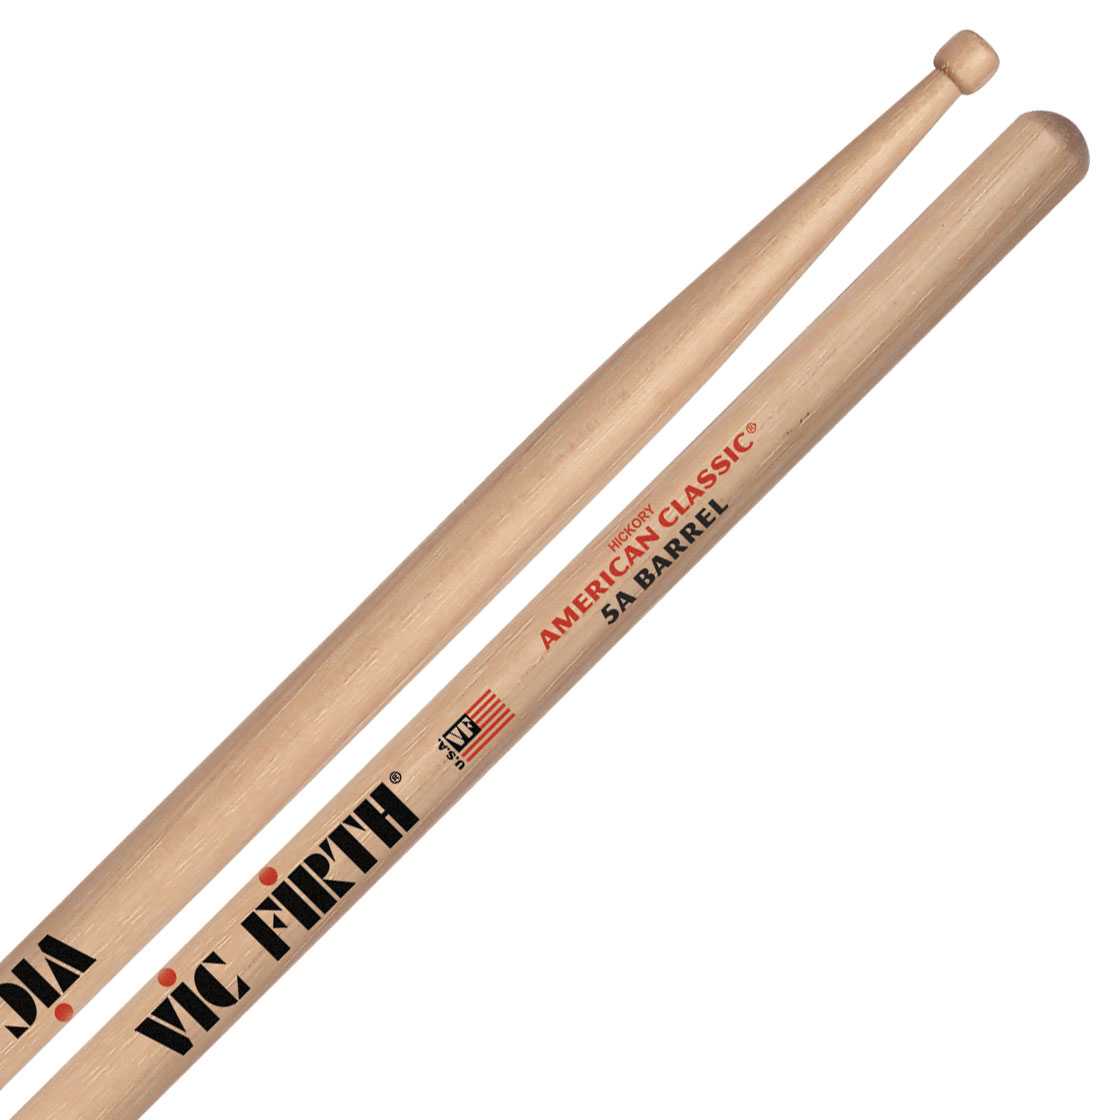 Vic Firth 5A Barrel Tip American Classic Hickory Snare Drum sticks